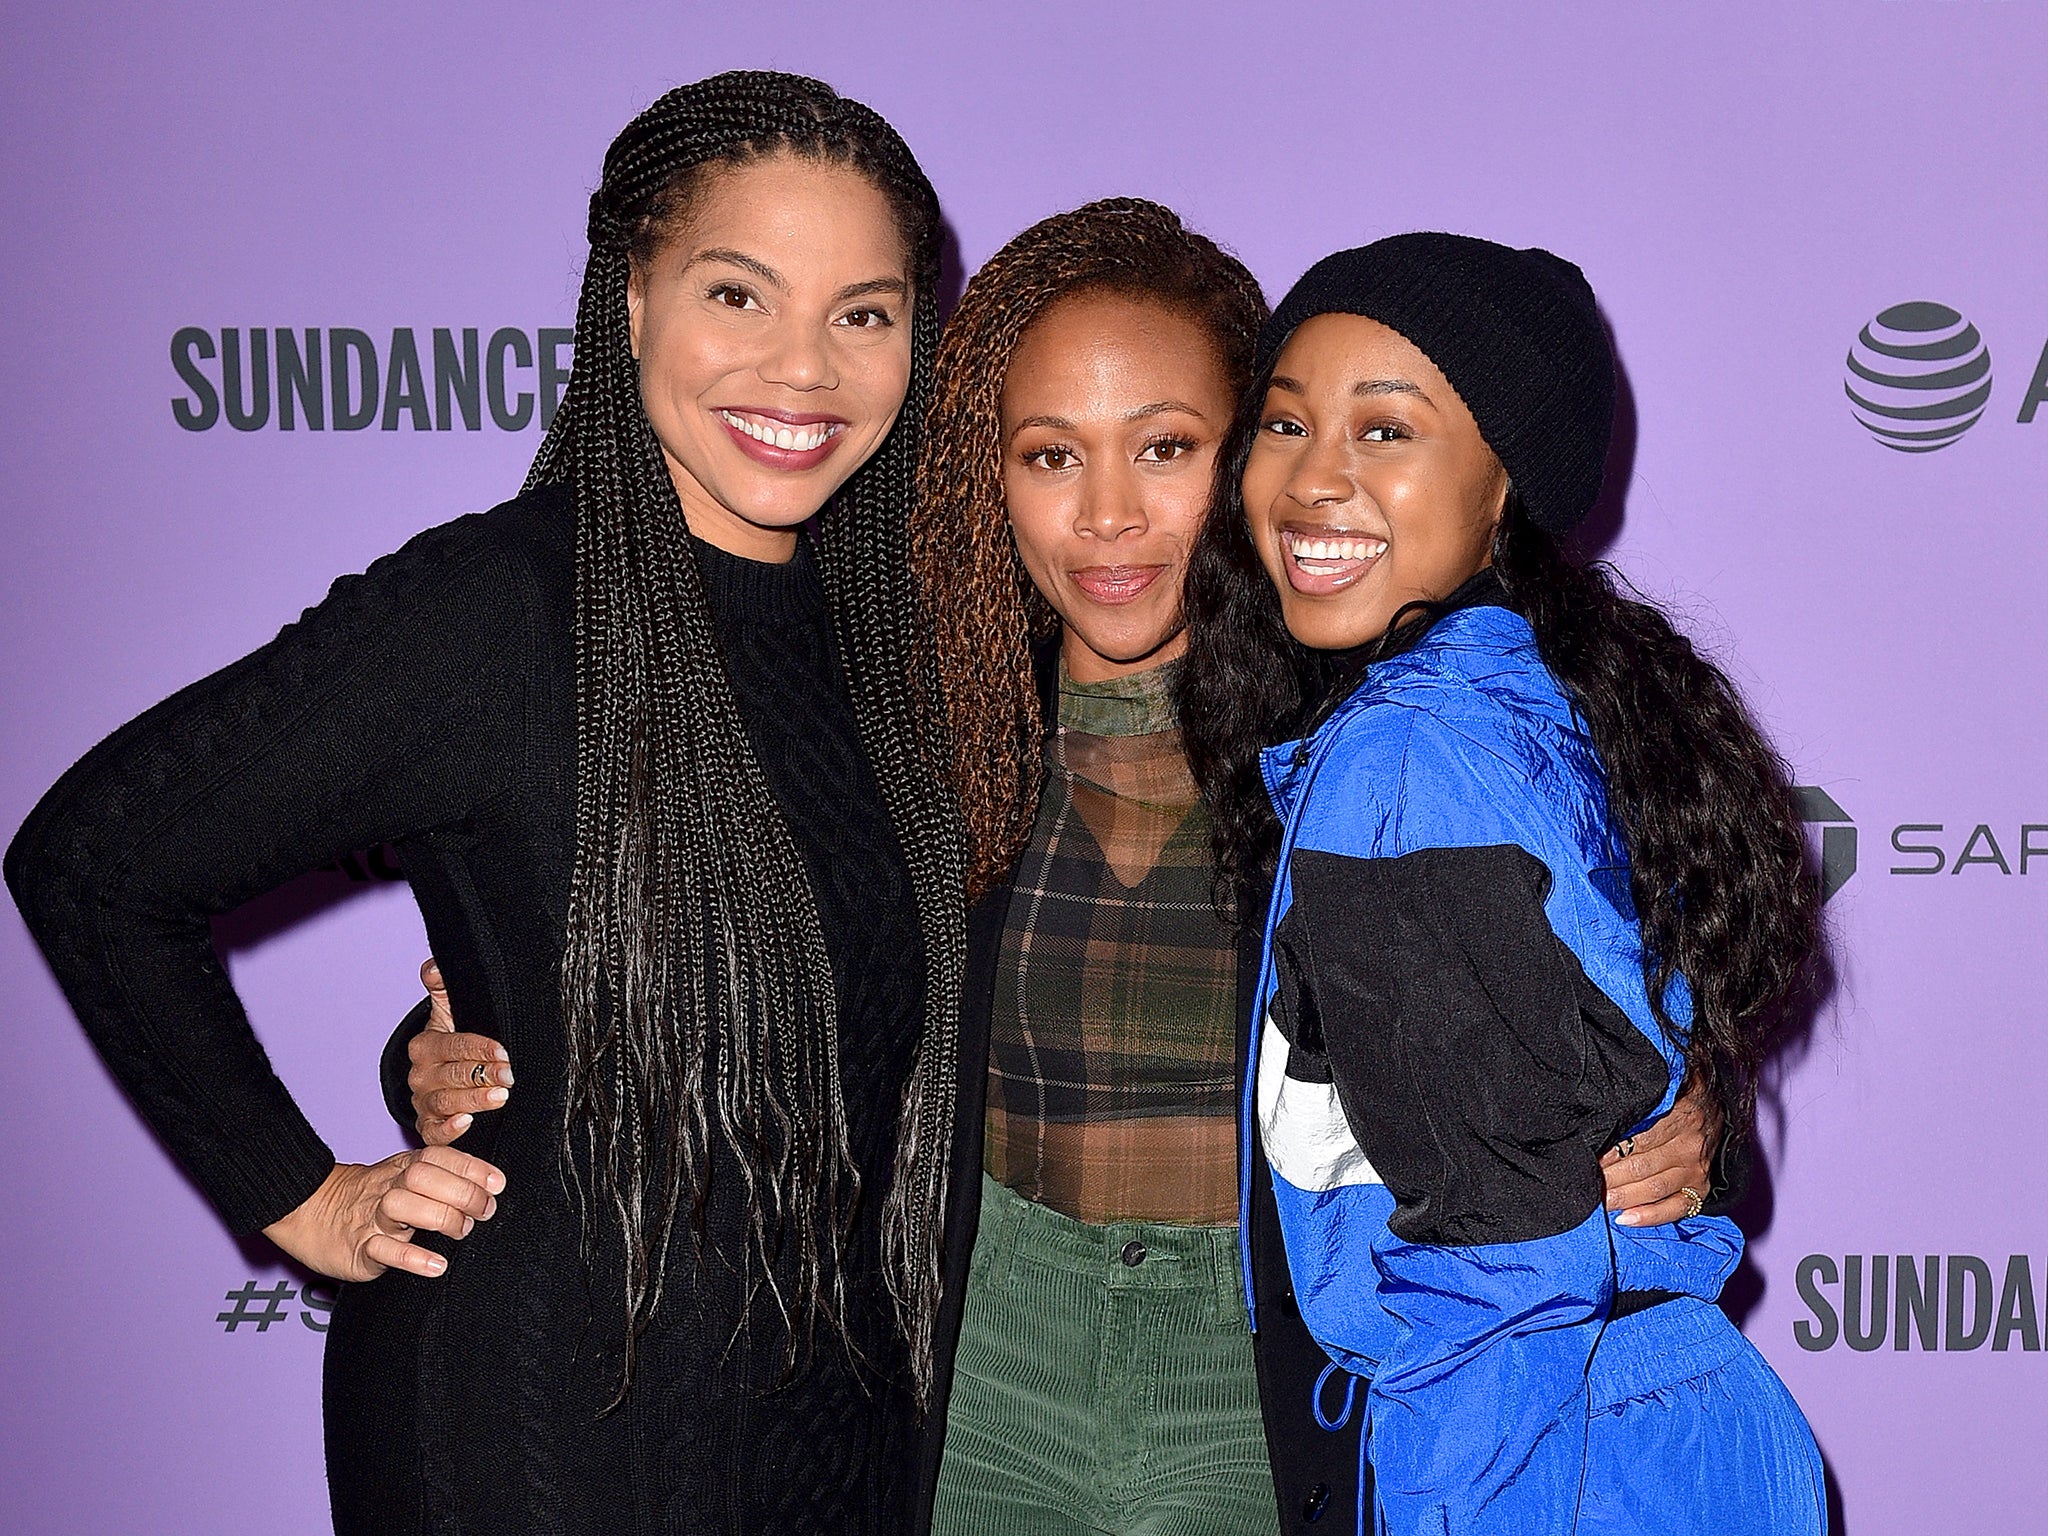 Channing Godfrey Peoples and her stars Nicole Beharie and Alexis Chikaeze at the Sundance Film Festival in January